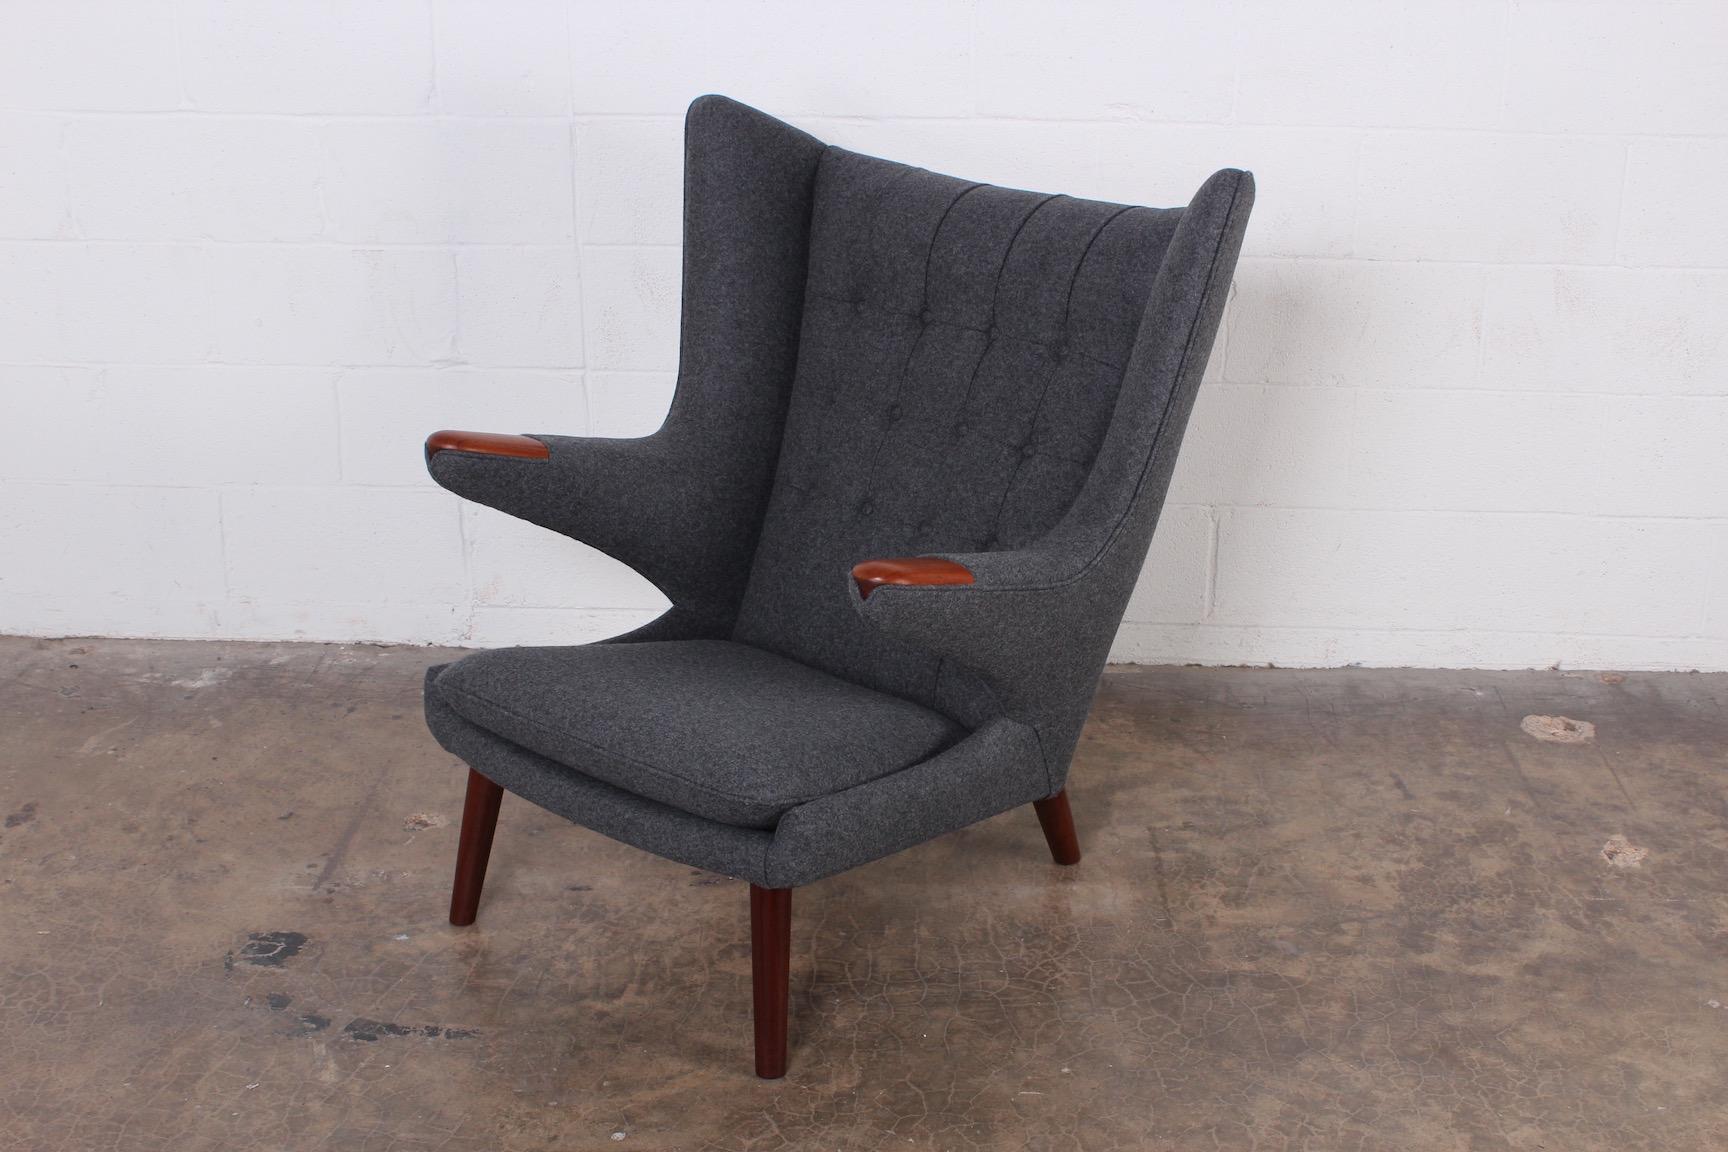 A fully restored Papa bear chair designed by Hans Wegner for A.P Stolen. Reupholstered in Maharam wool.